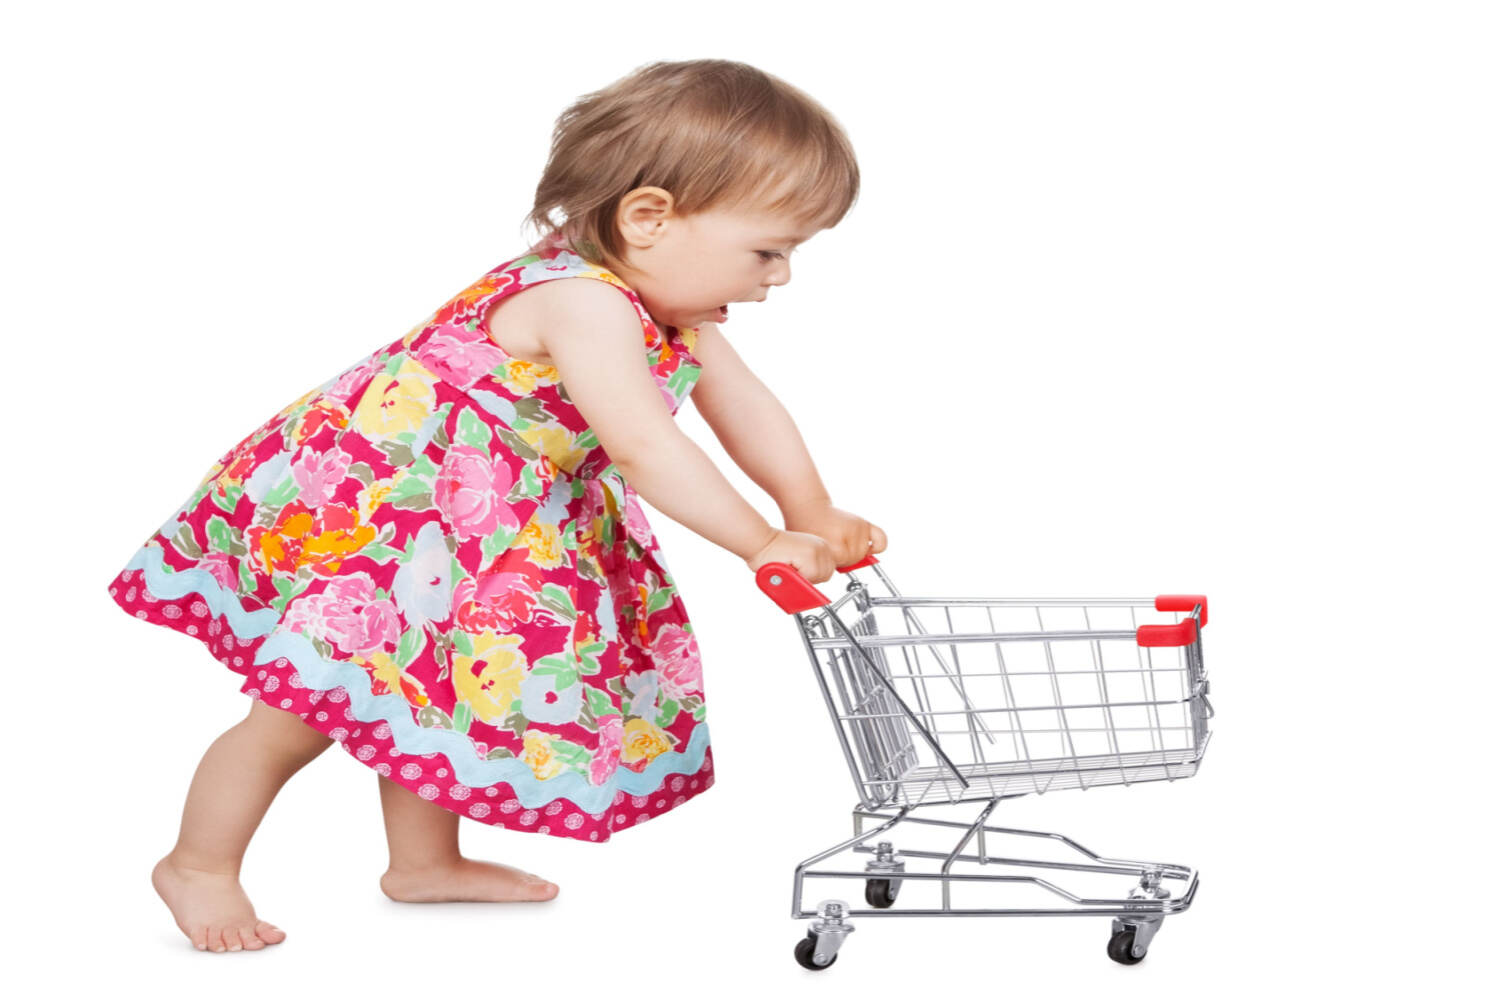 Tips when taking your toddler grocery shopping